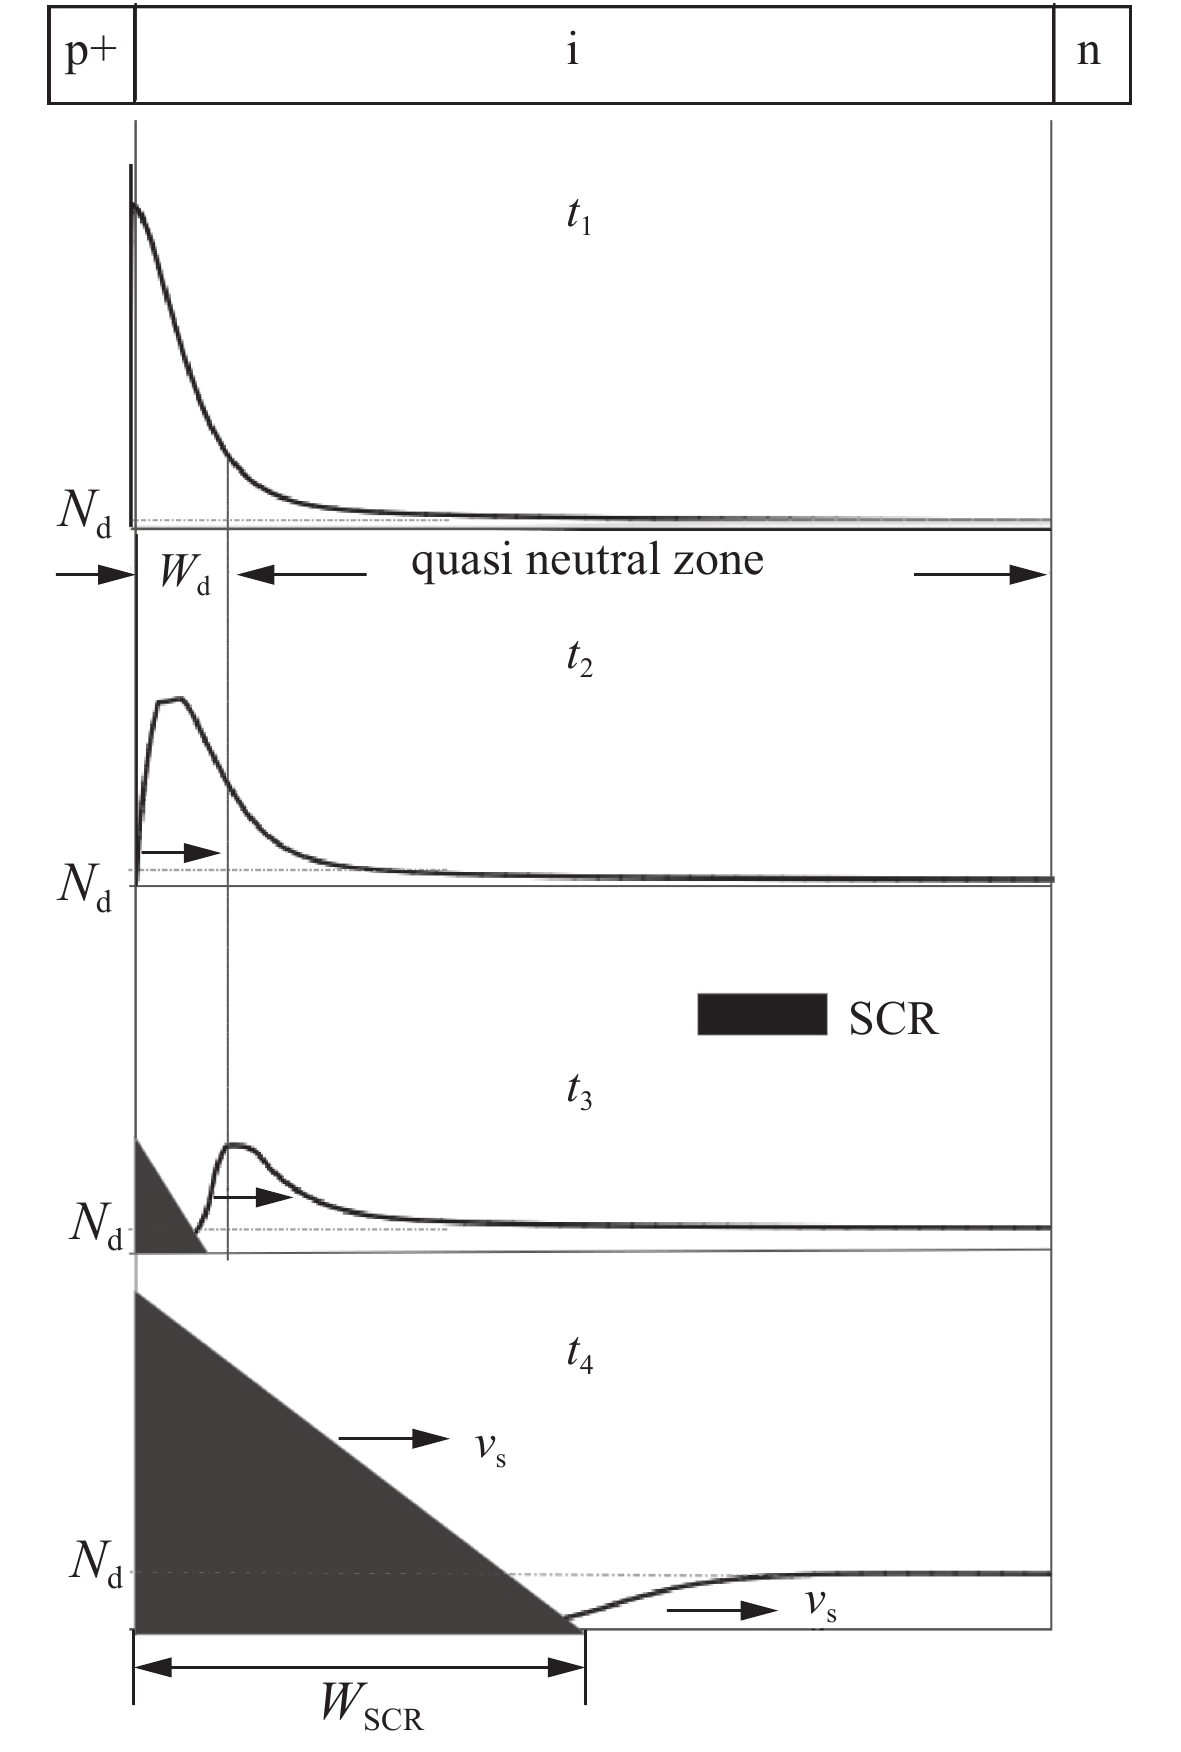 Sketches of electric field and plasma concentration profiles during the opening process